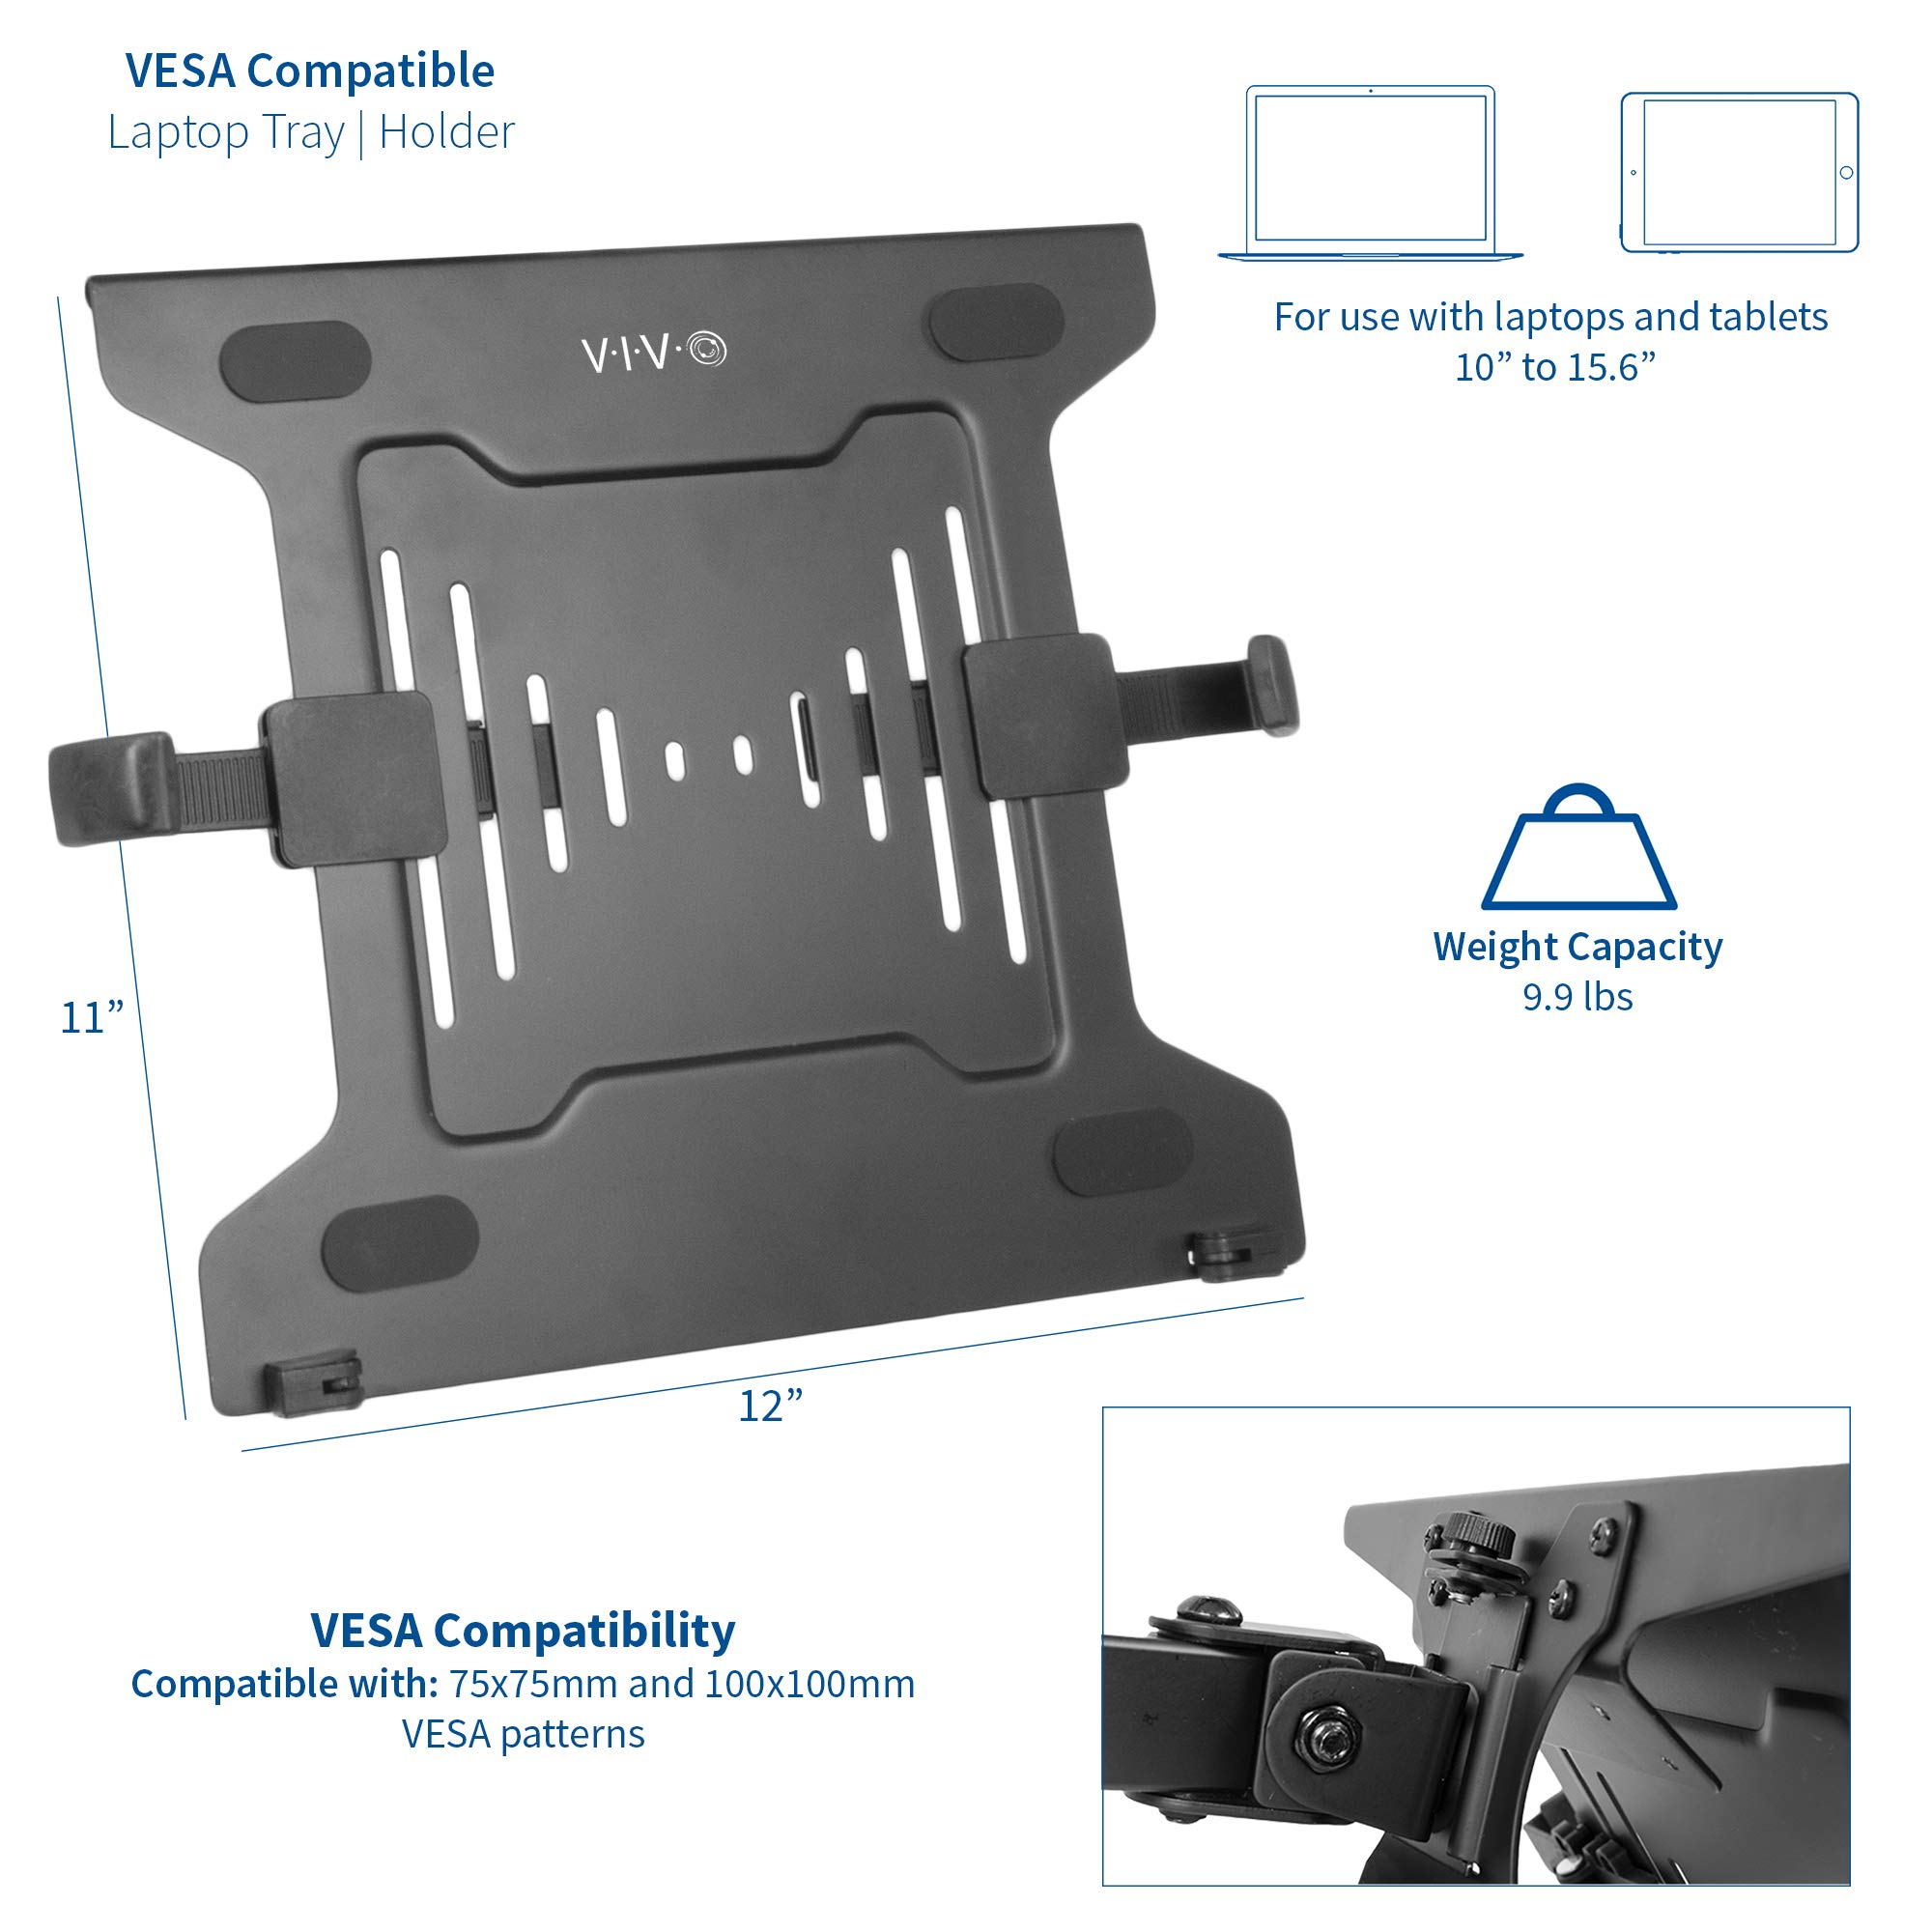 VIVO Universal Adjustable 10 to 15.6 inch Laptop Mount Holder for VESA Compatible Monitor Arms, Notebook Tray Stand-LAP3